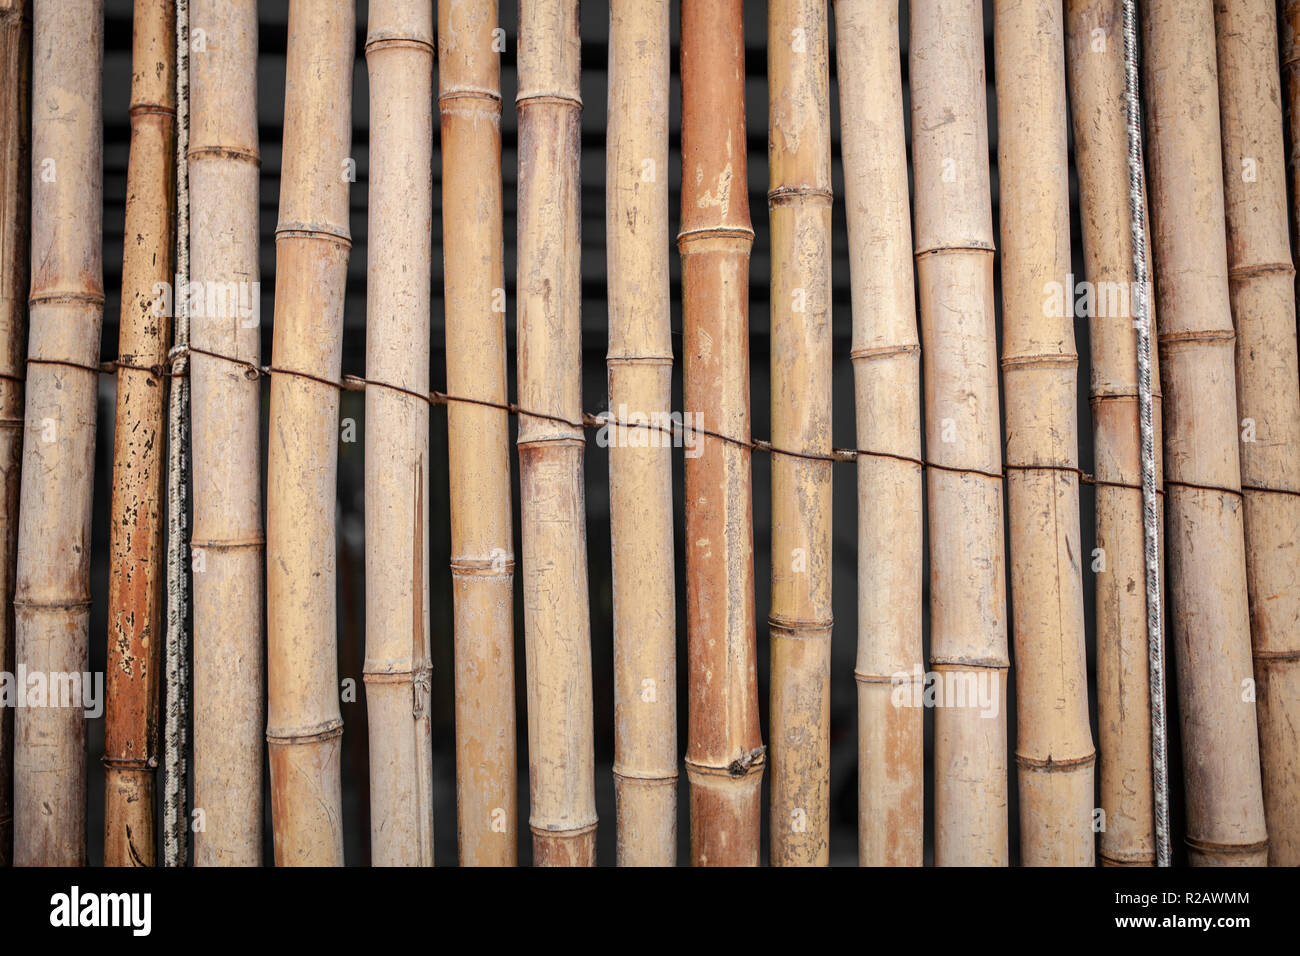 Dry Bamboo Wall tied with rope Texture Background,Bamboo fence